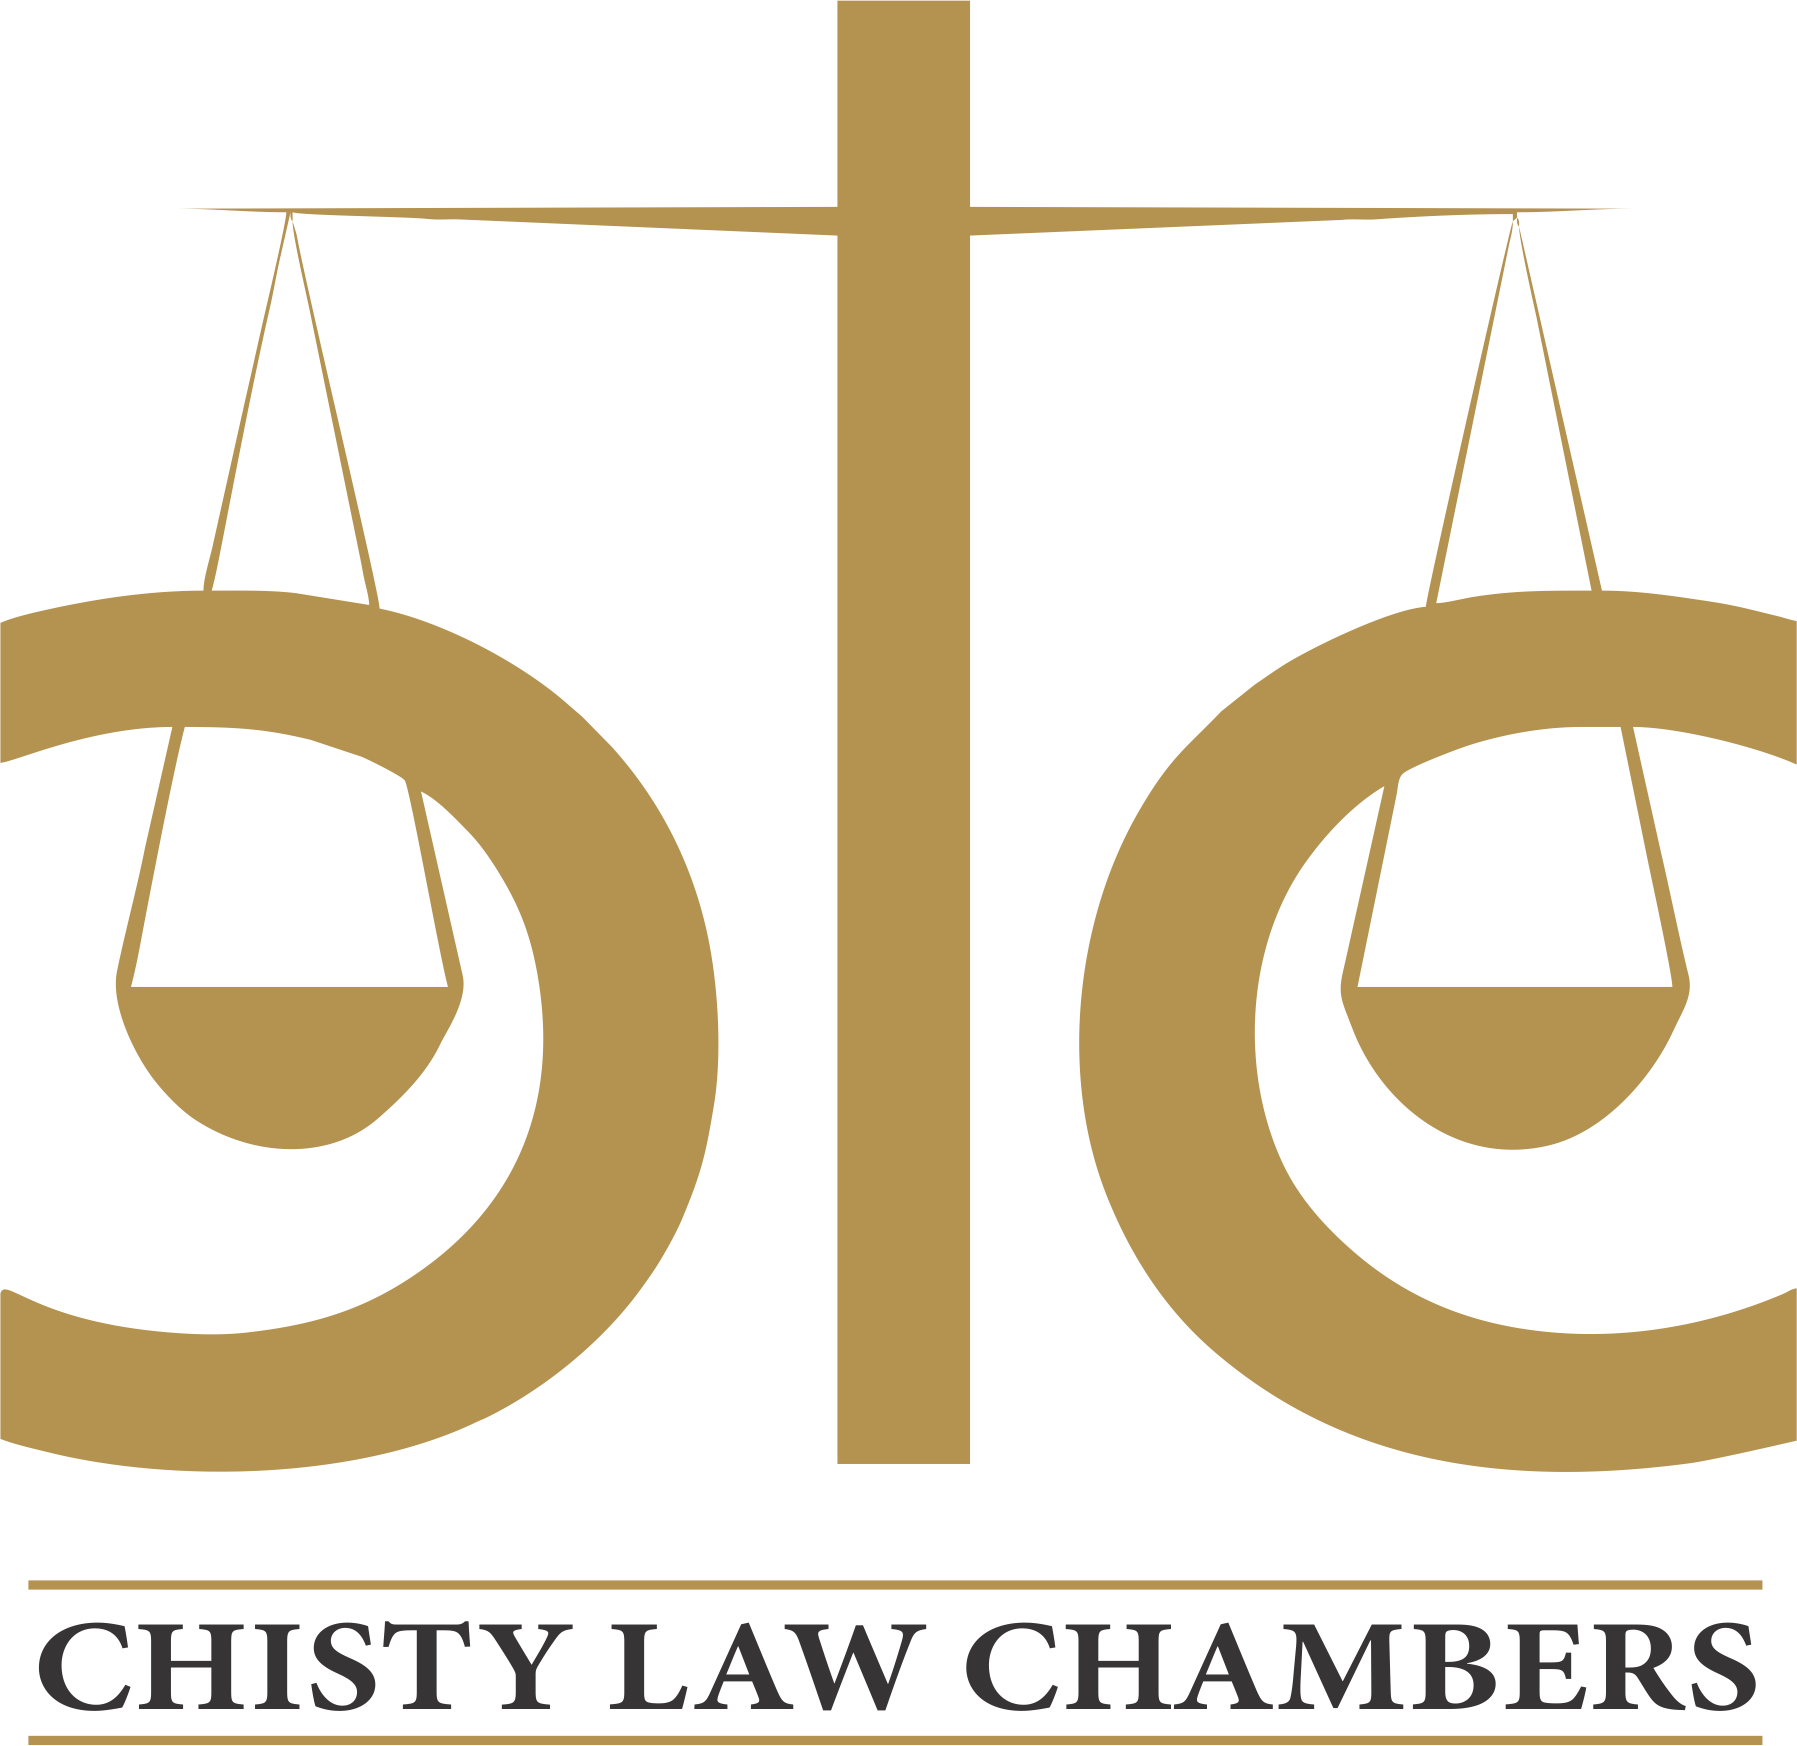 Home | Chisty Law Chambers